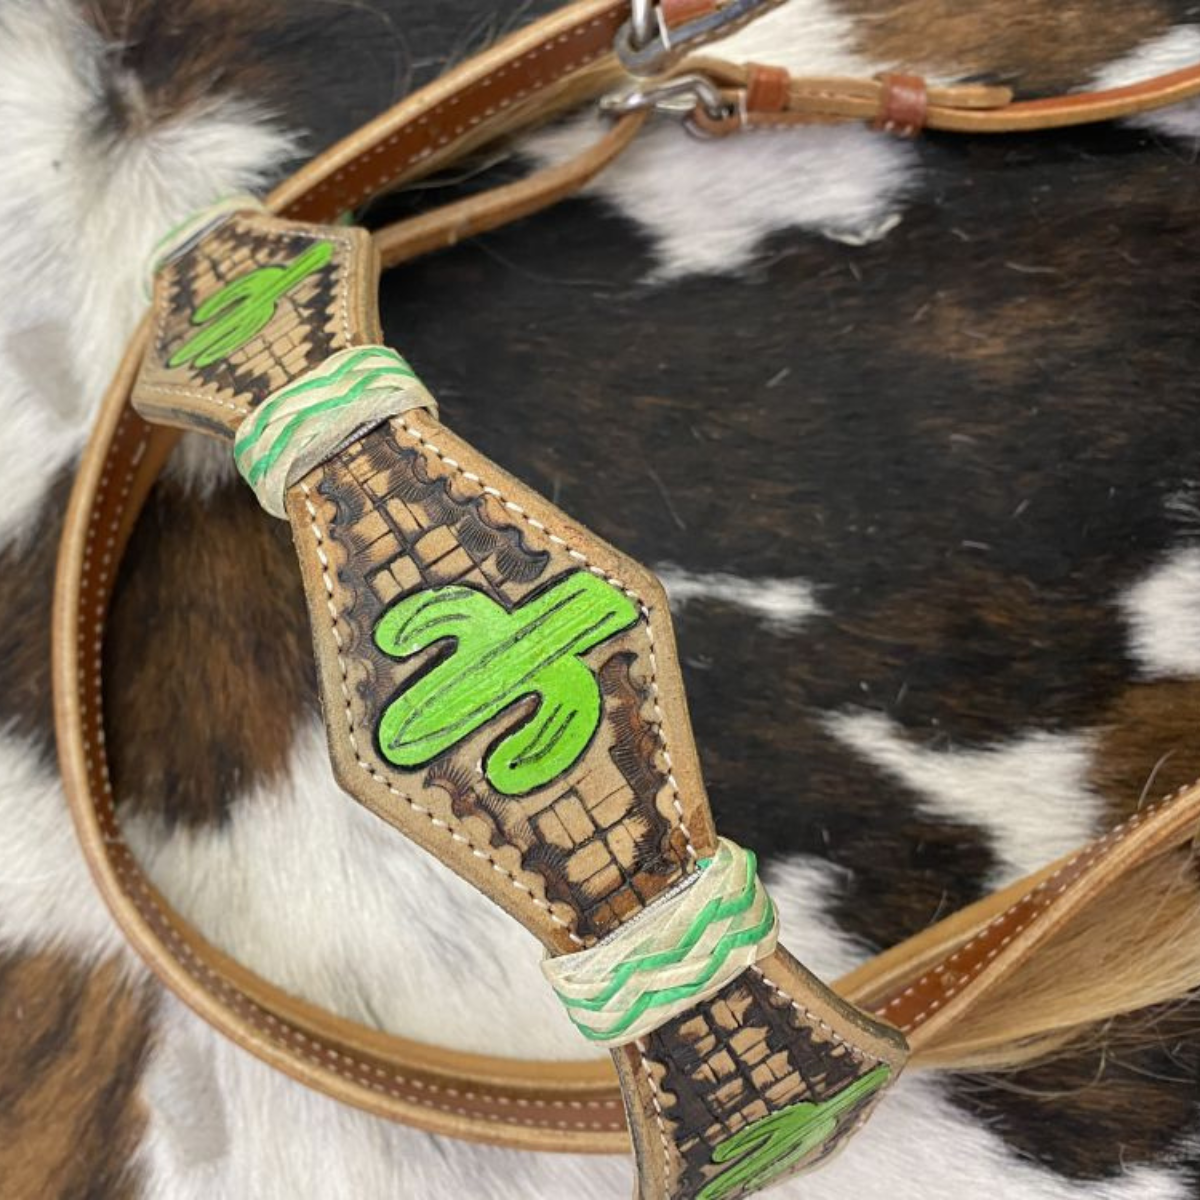 Showman® Leather bosal headstall with cactus painted design on medium leather and white cotton mecate reins. - Double T Saddles